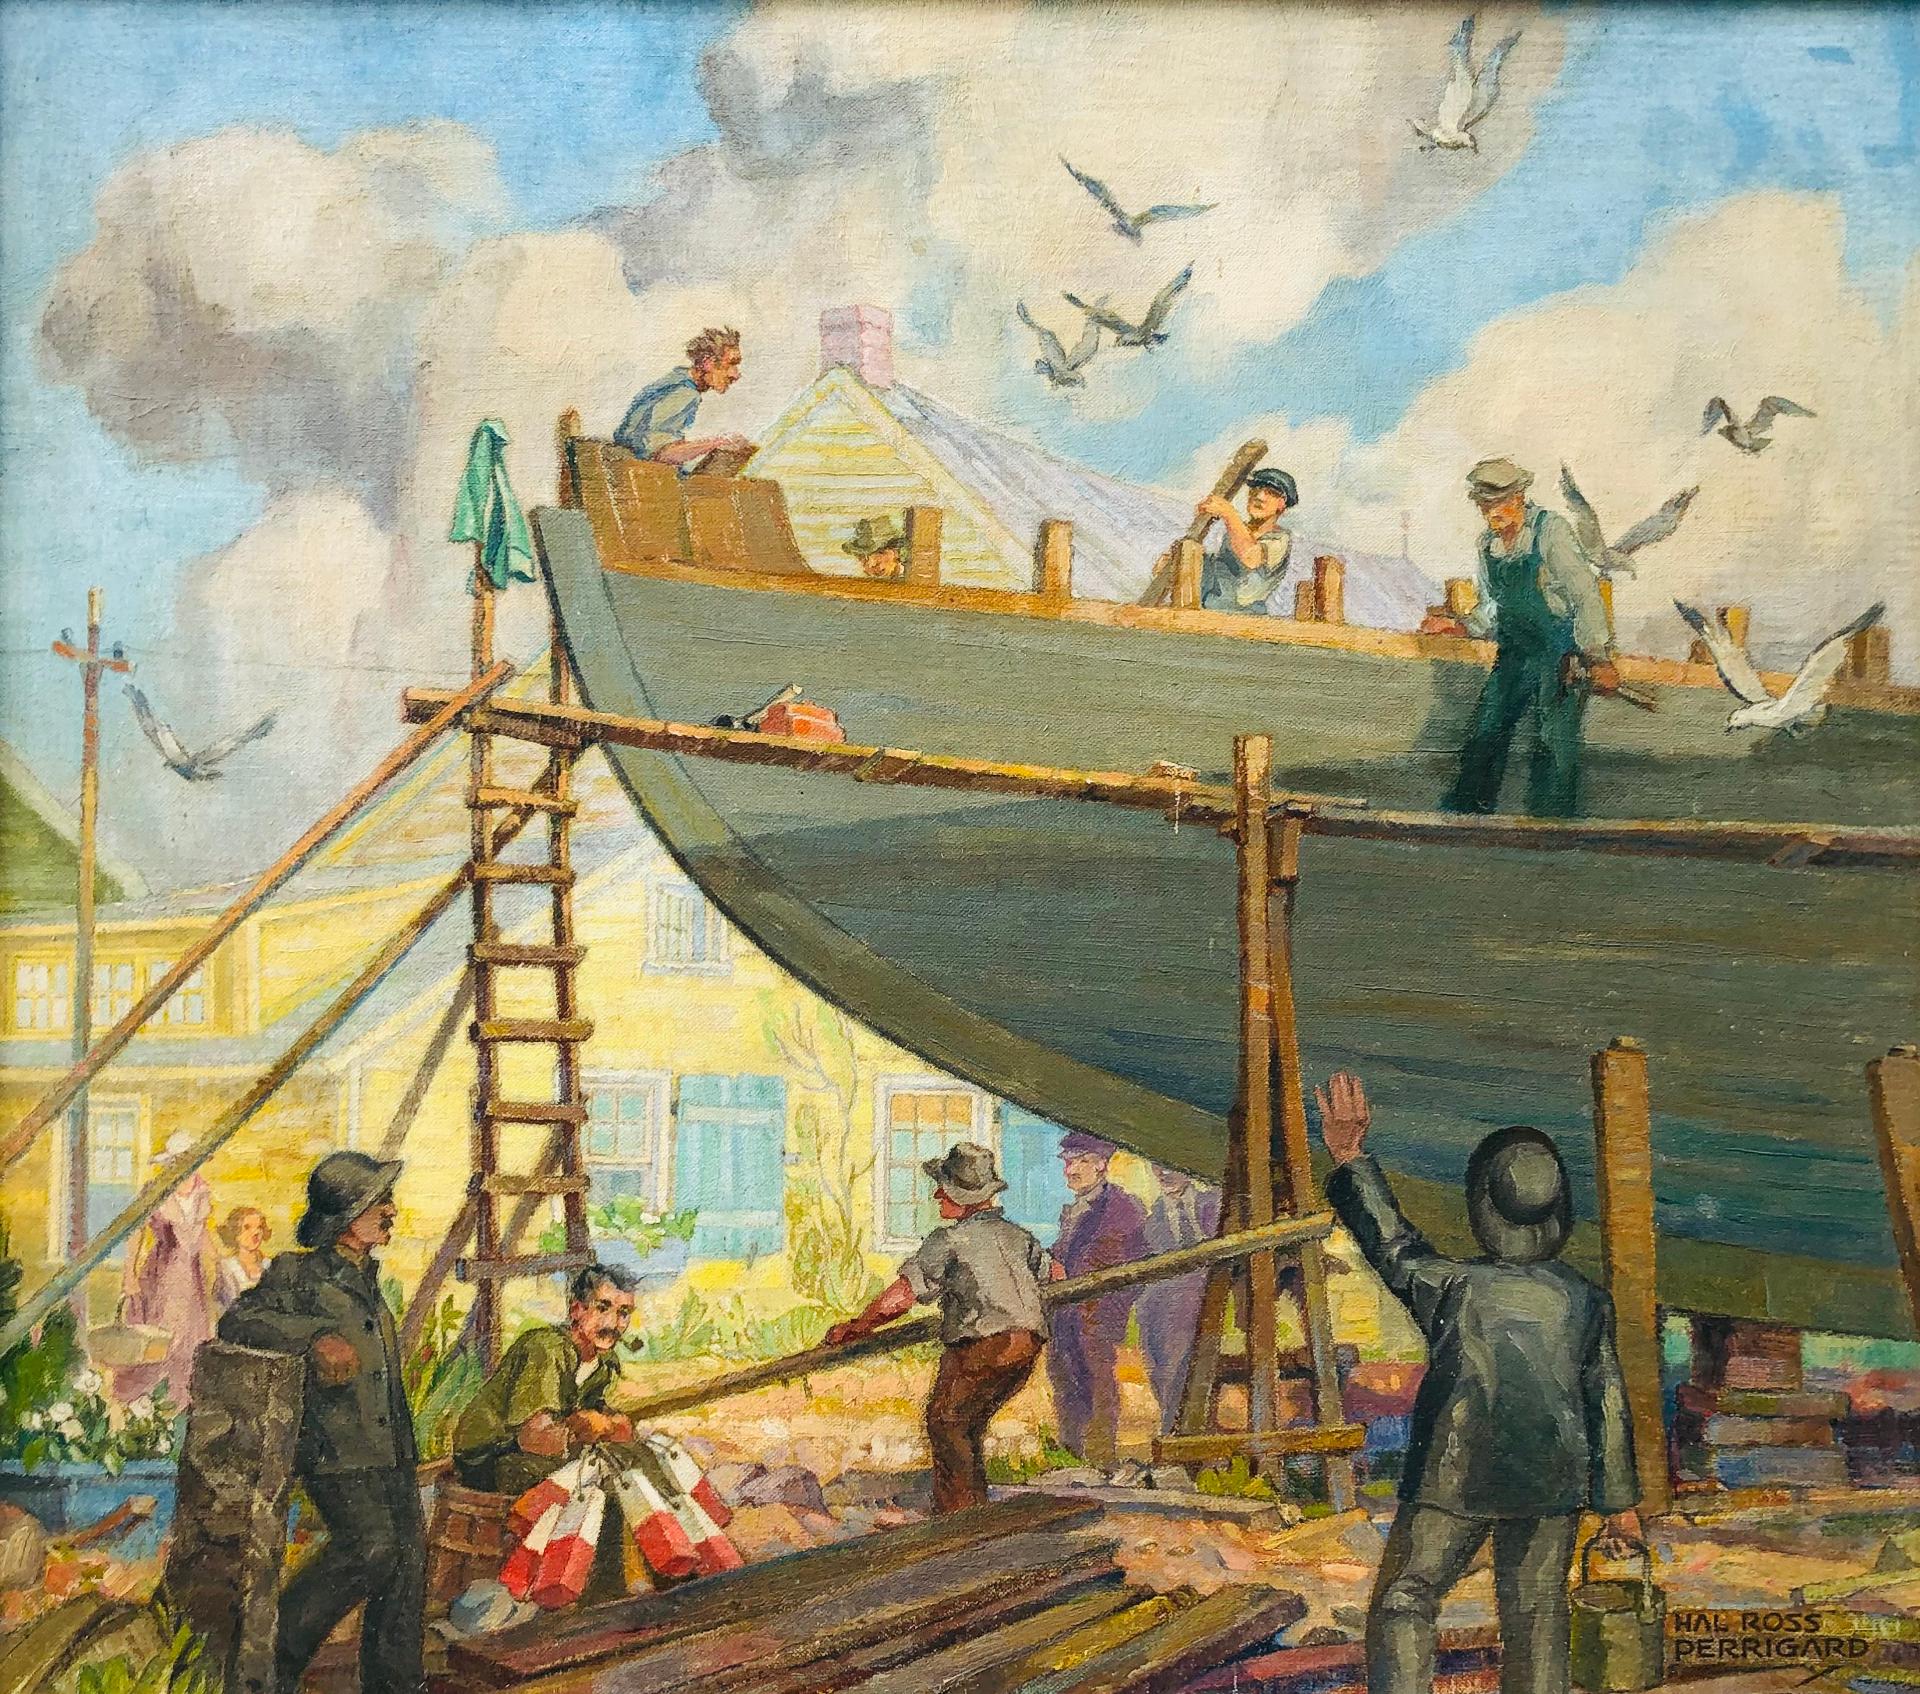 Hal Ross Perrigard (1891-1960) - The New Boat, 1949